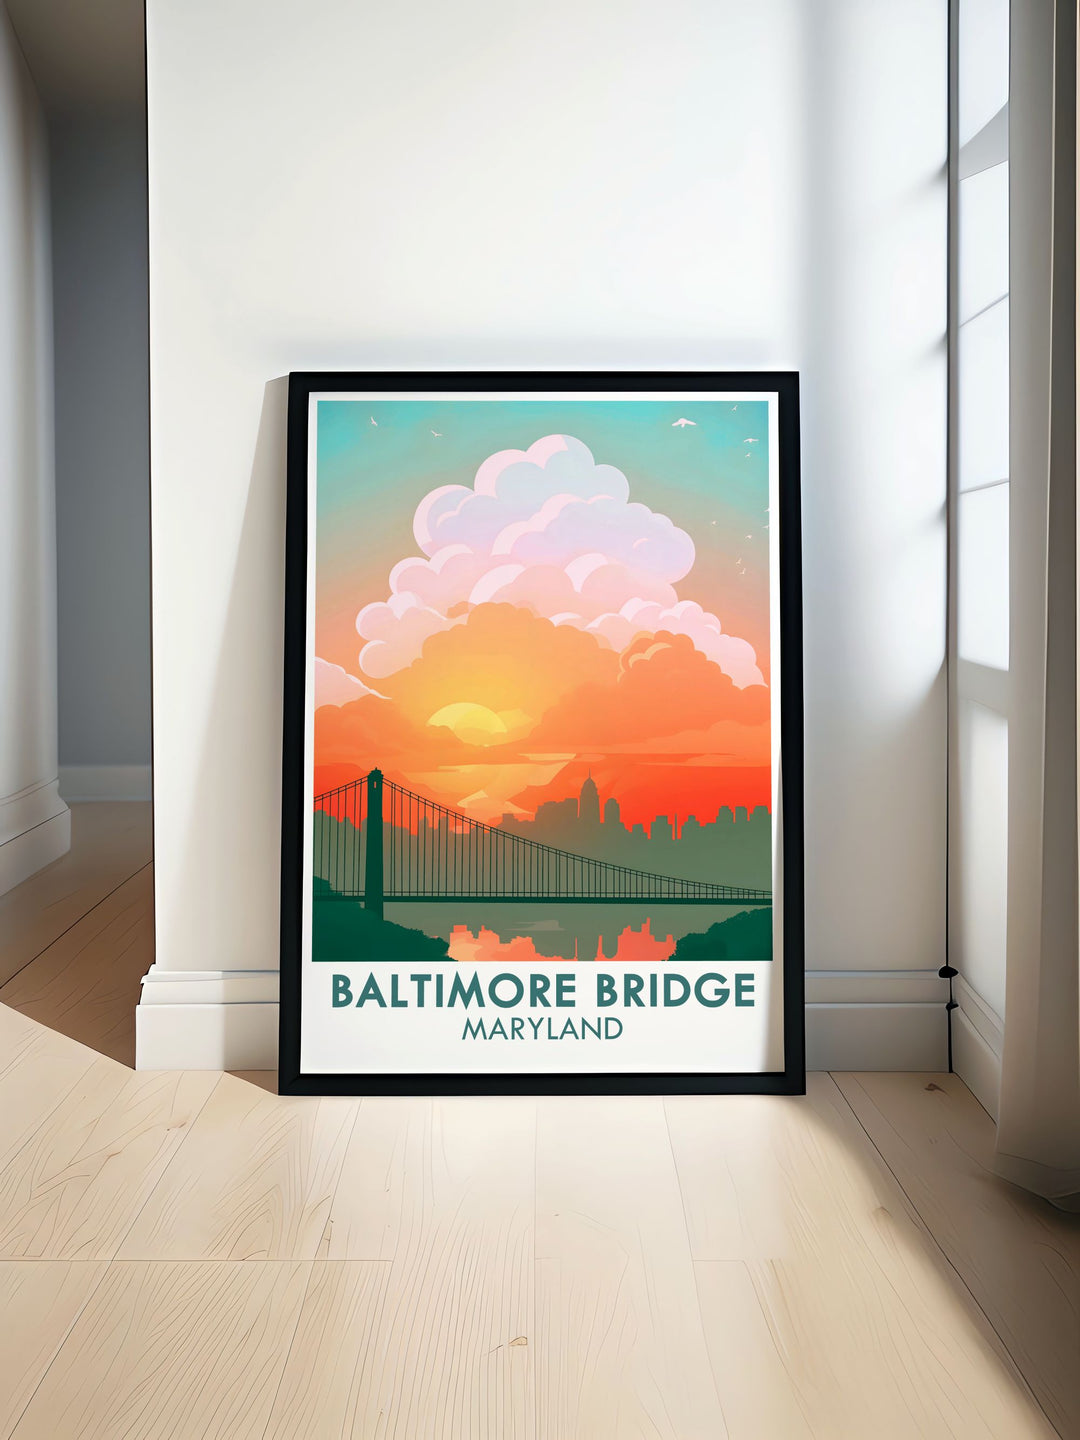 Stunning Maryland art print showcasing the new Key Bridge design in Baltimore. The vibrant cityscape and bridge details make this a perfect addition to home decor. Ideal for housewarming gifts and fans of Baltimore wall art and Maryland artwork.